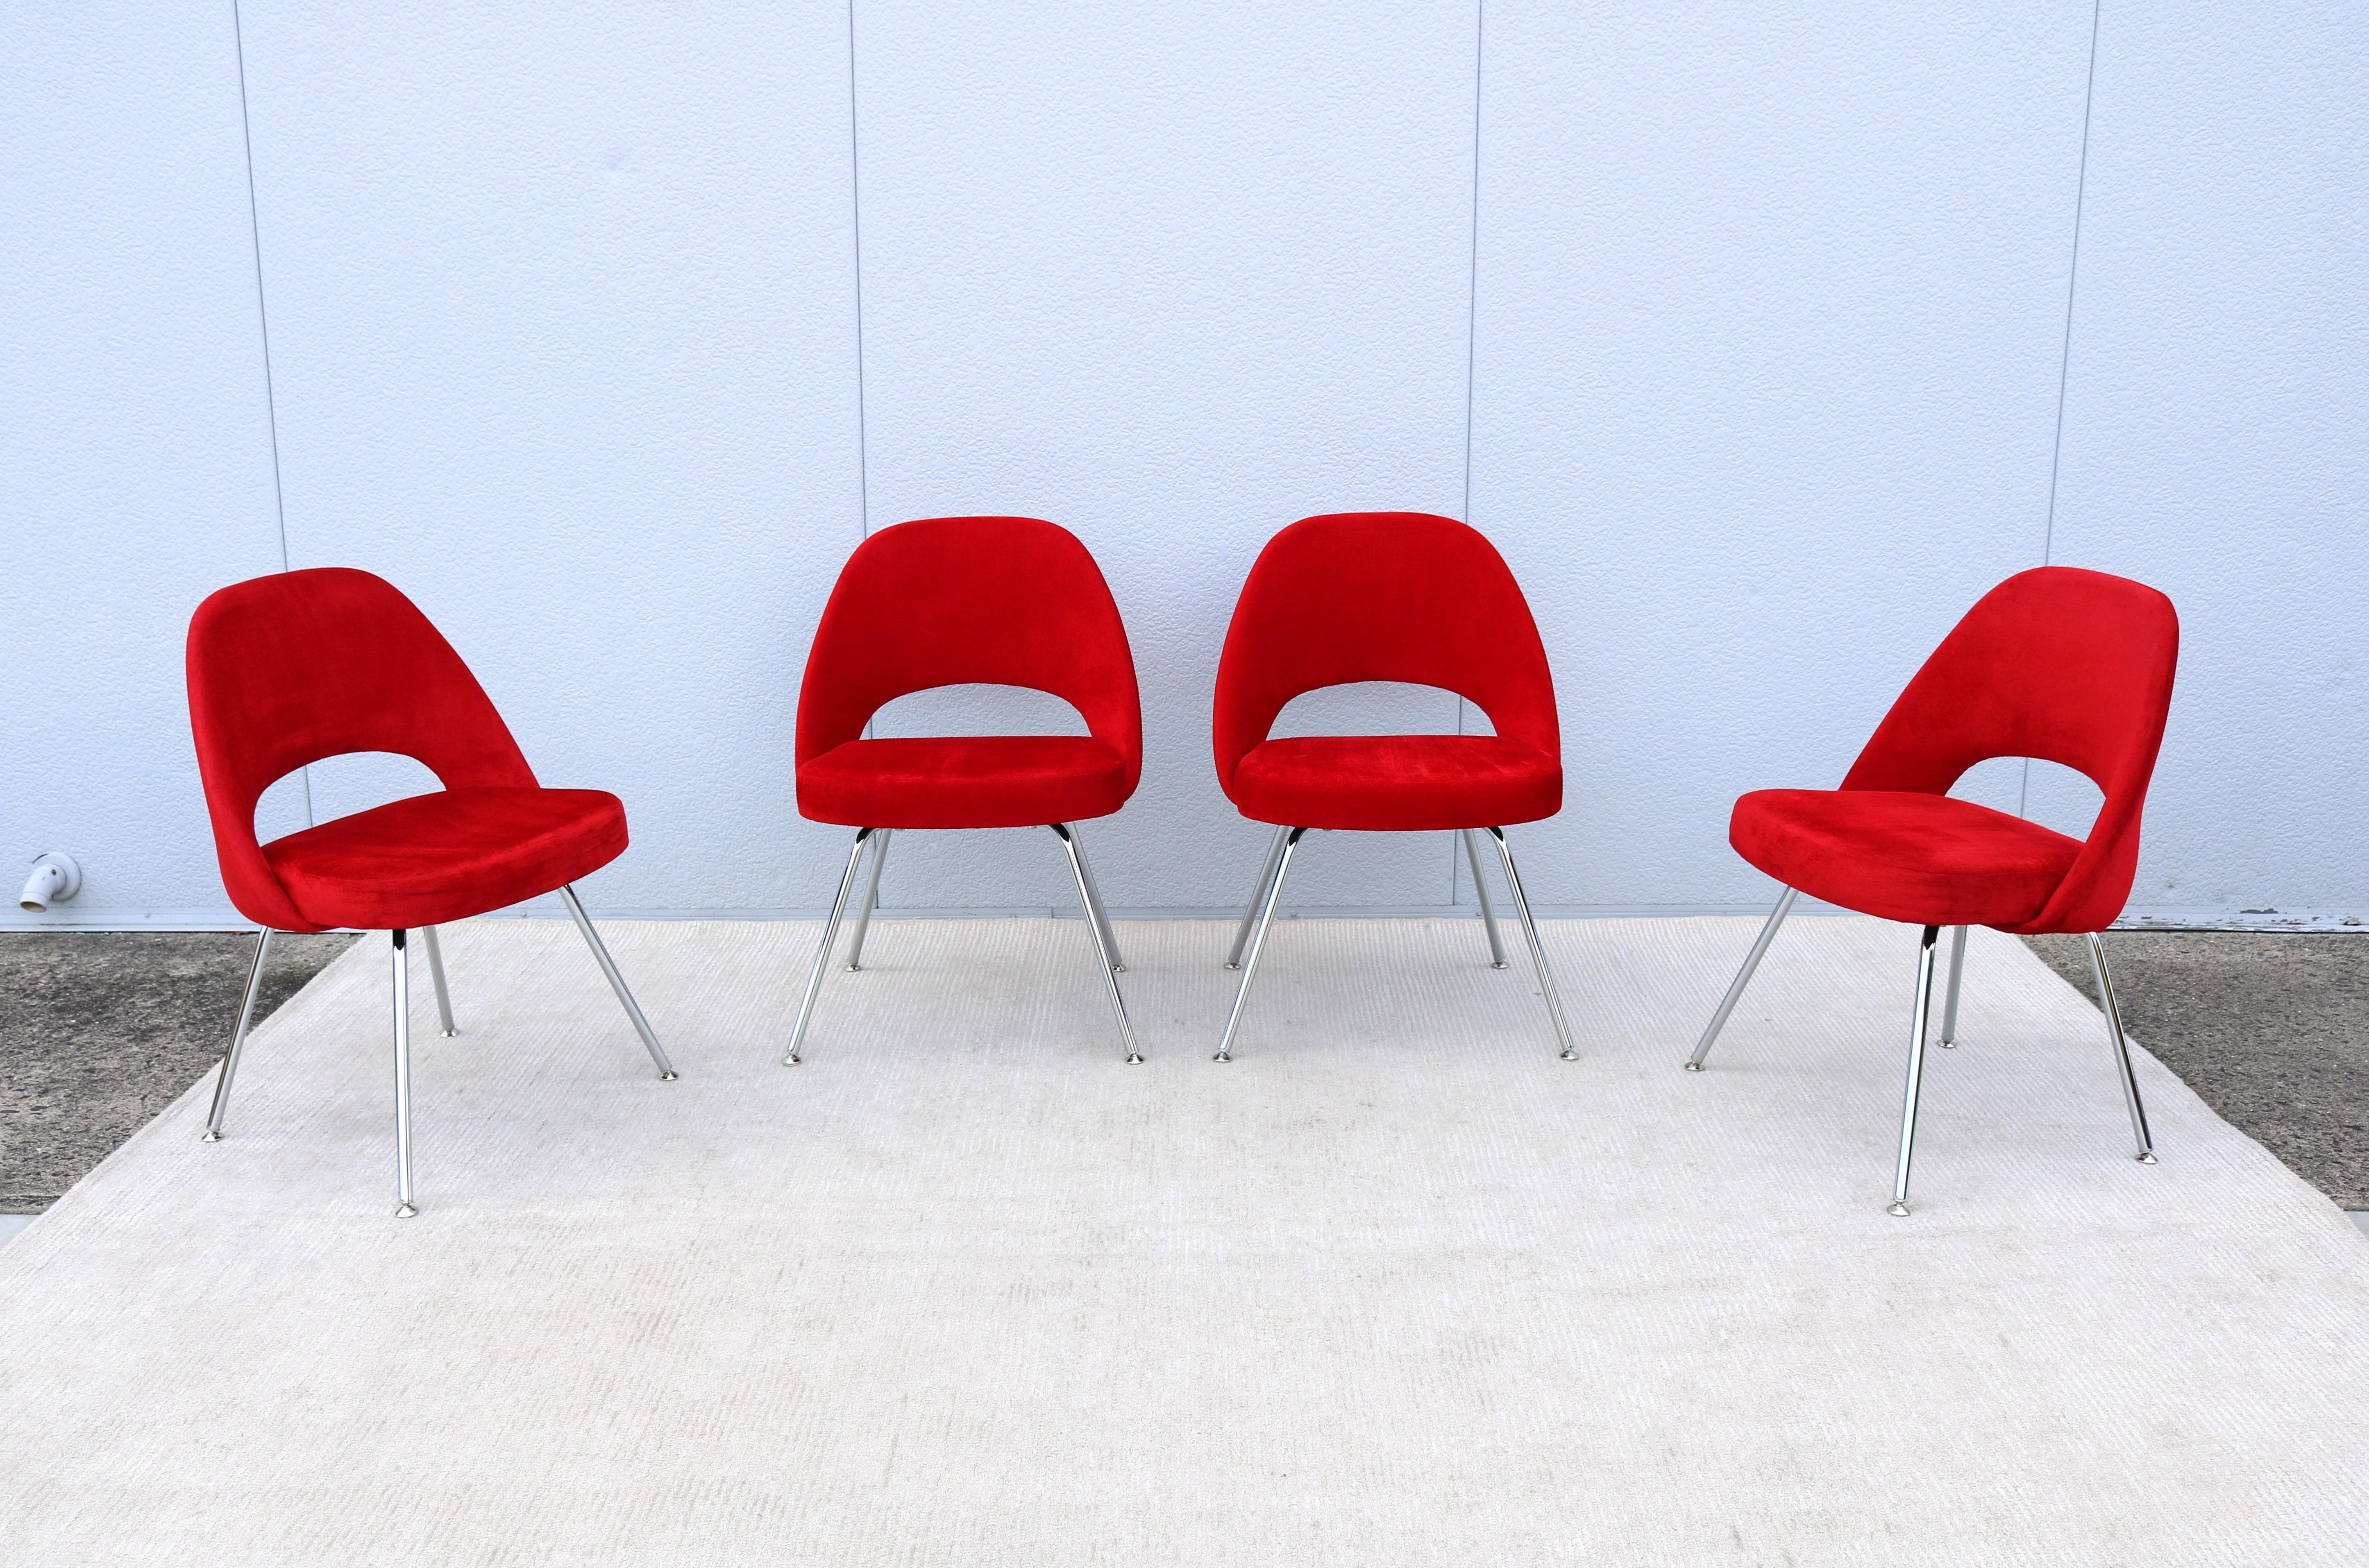 Stunning authentic mid-century modern set of four Saarinen executive armless chairs by Knoll.
One of Knoll's most popular designs that achieved supreme comfort through the shape of its shell.
It was introduced in 1950 a midcentury modern classic of